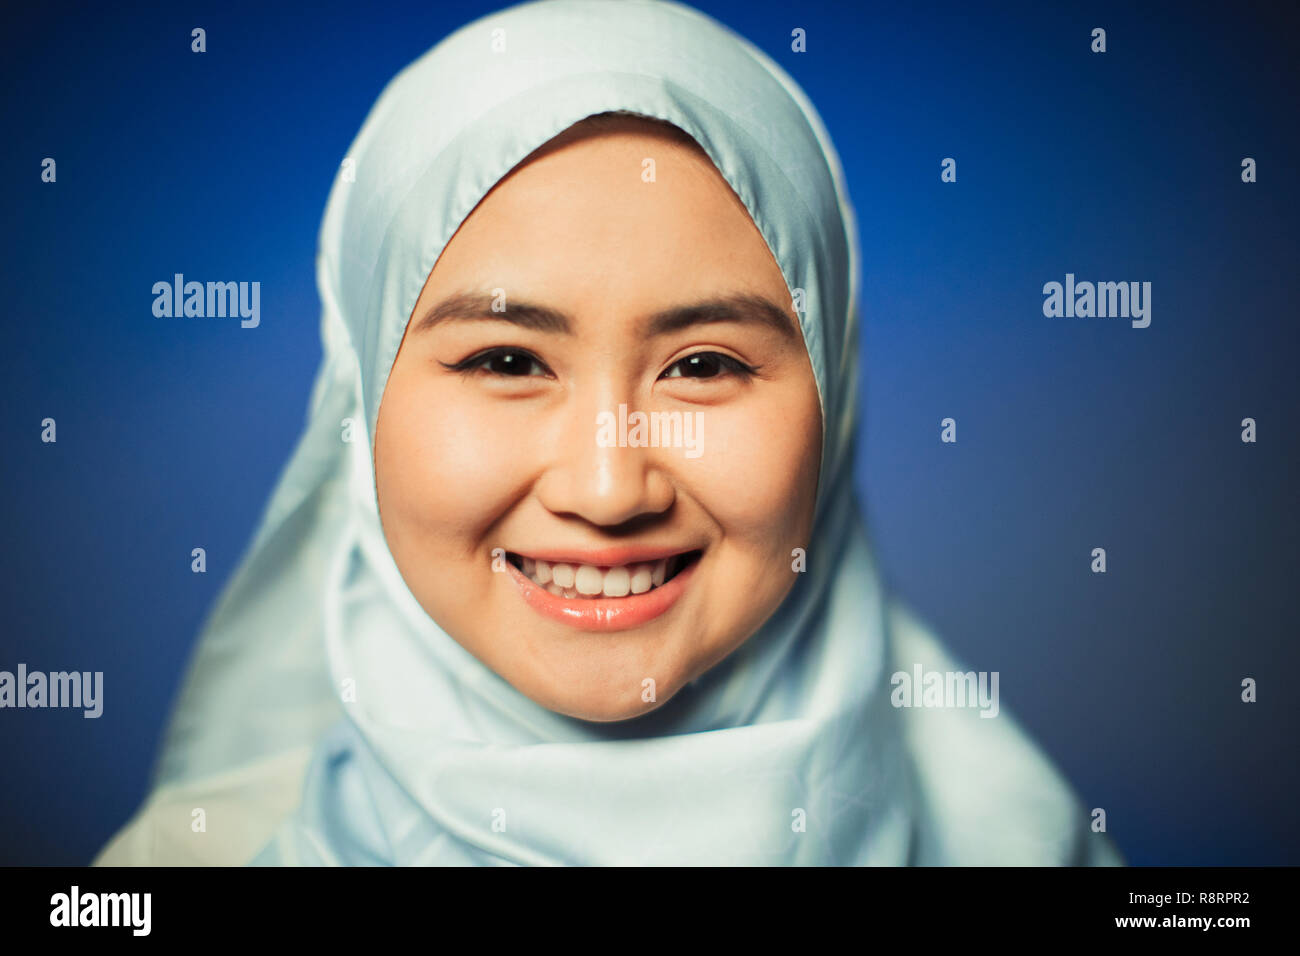 Close up portrait smiling, confident young woman wearing blue silk hijab Stock Photo